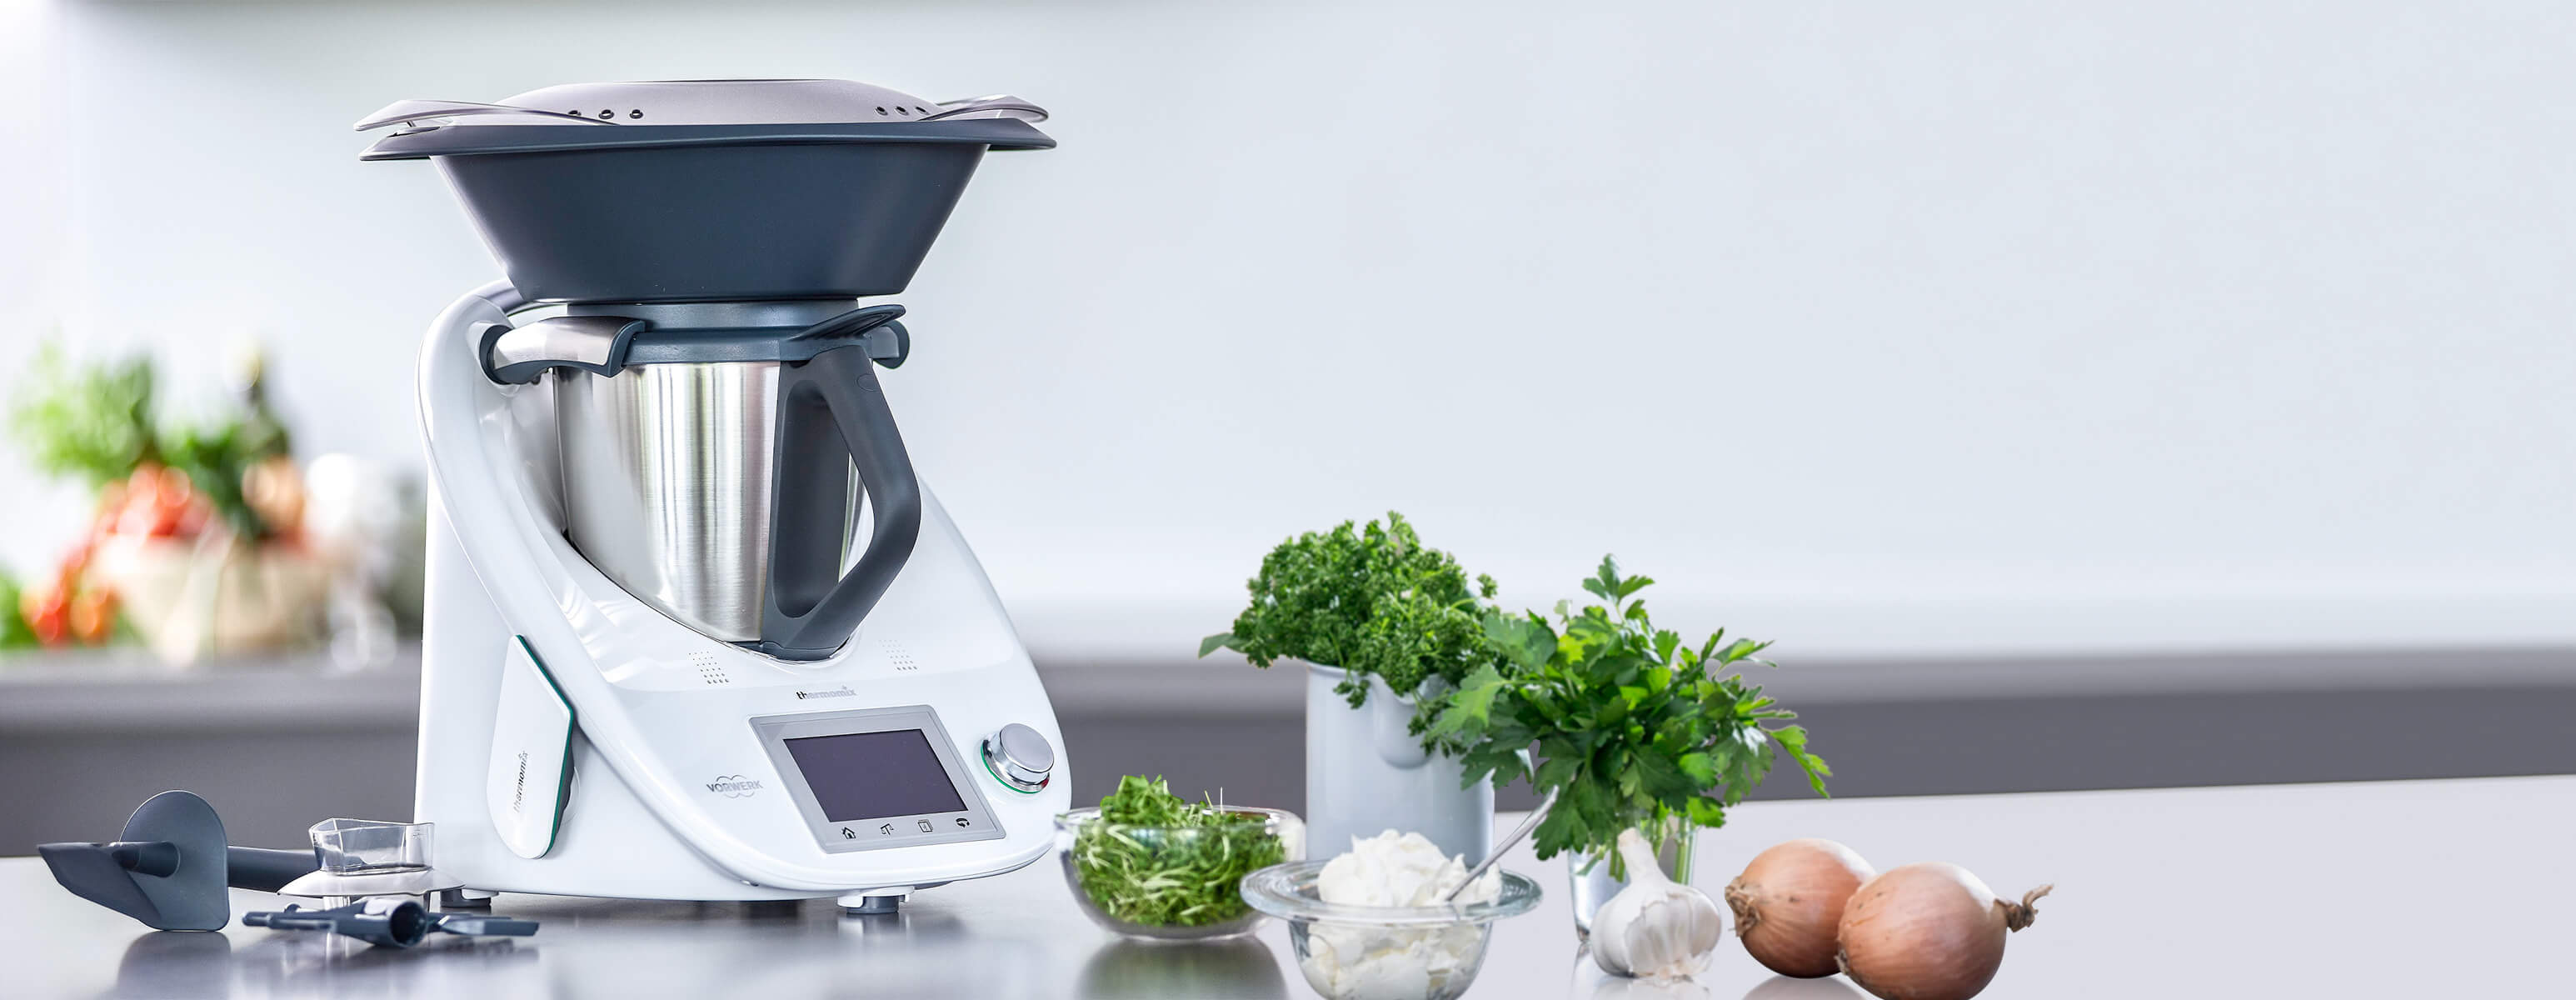 Batch cooking thermomix dieta